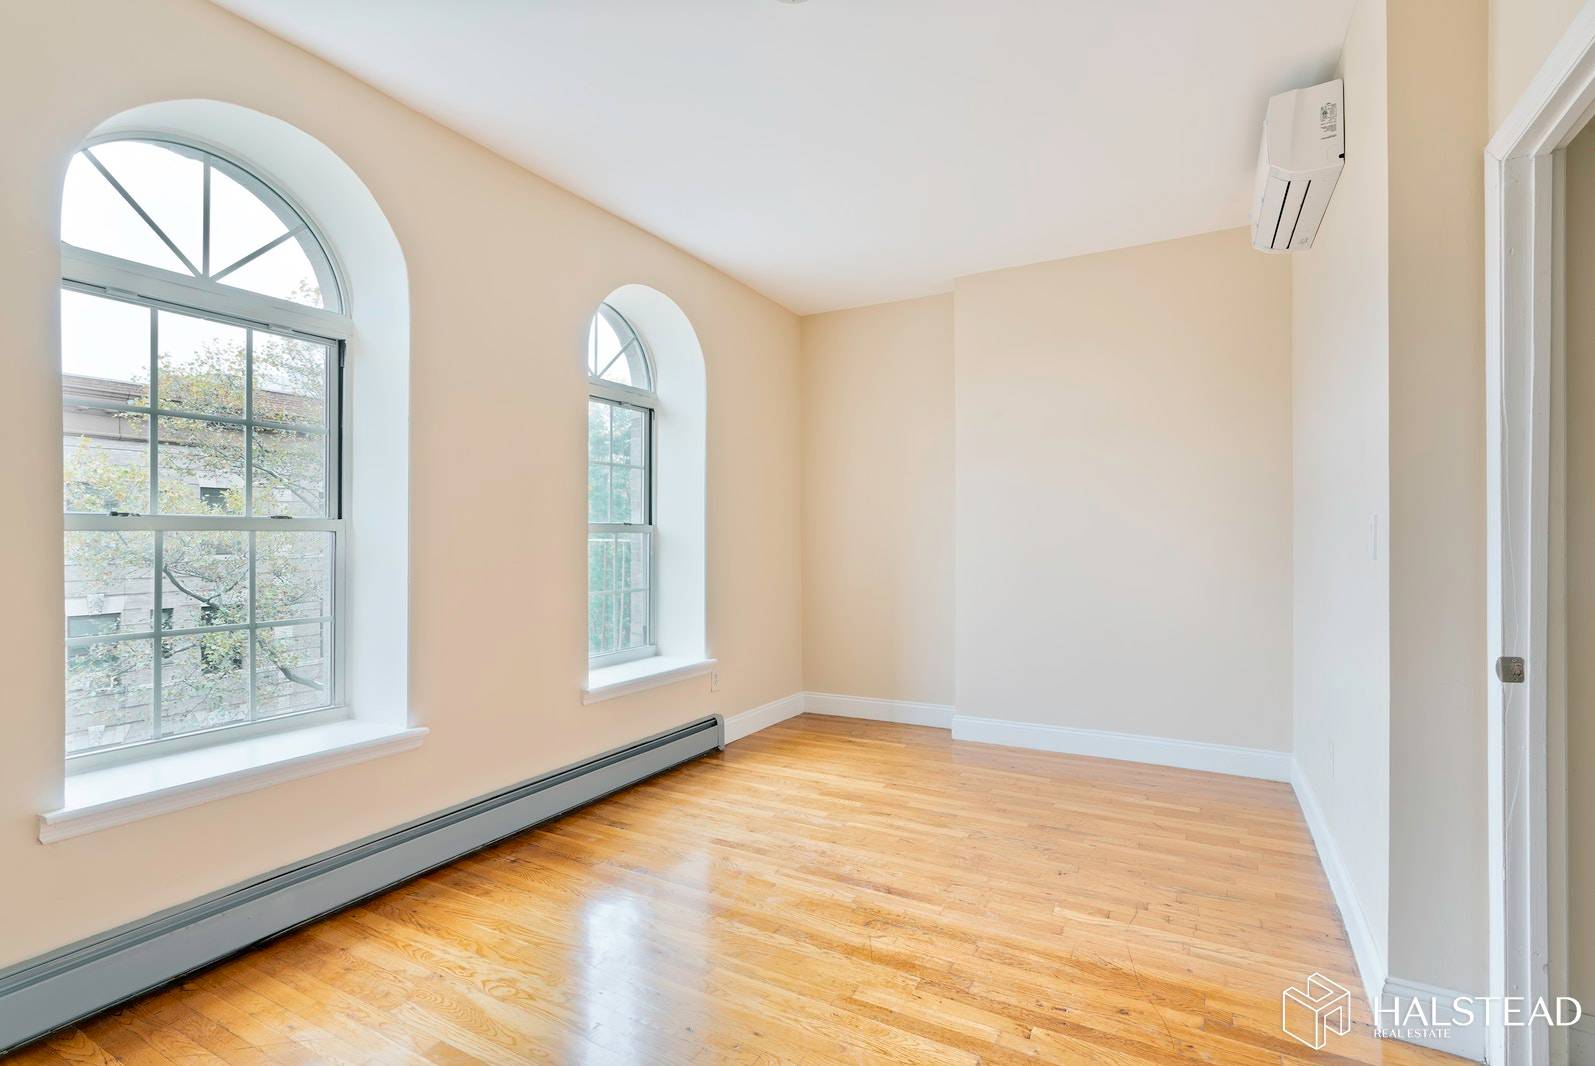 Newly renovated, luxury 3 bedroom 2 bathroom apartment available for immediate occupancy in the heart of Bedford Stuyvesant, Brooklyn.